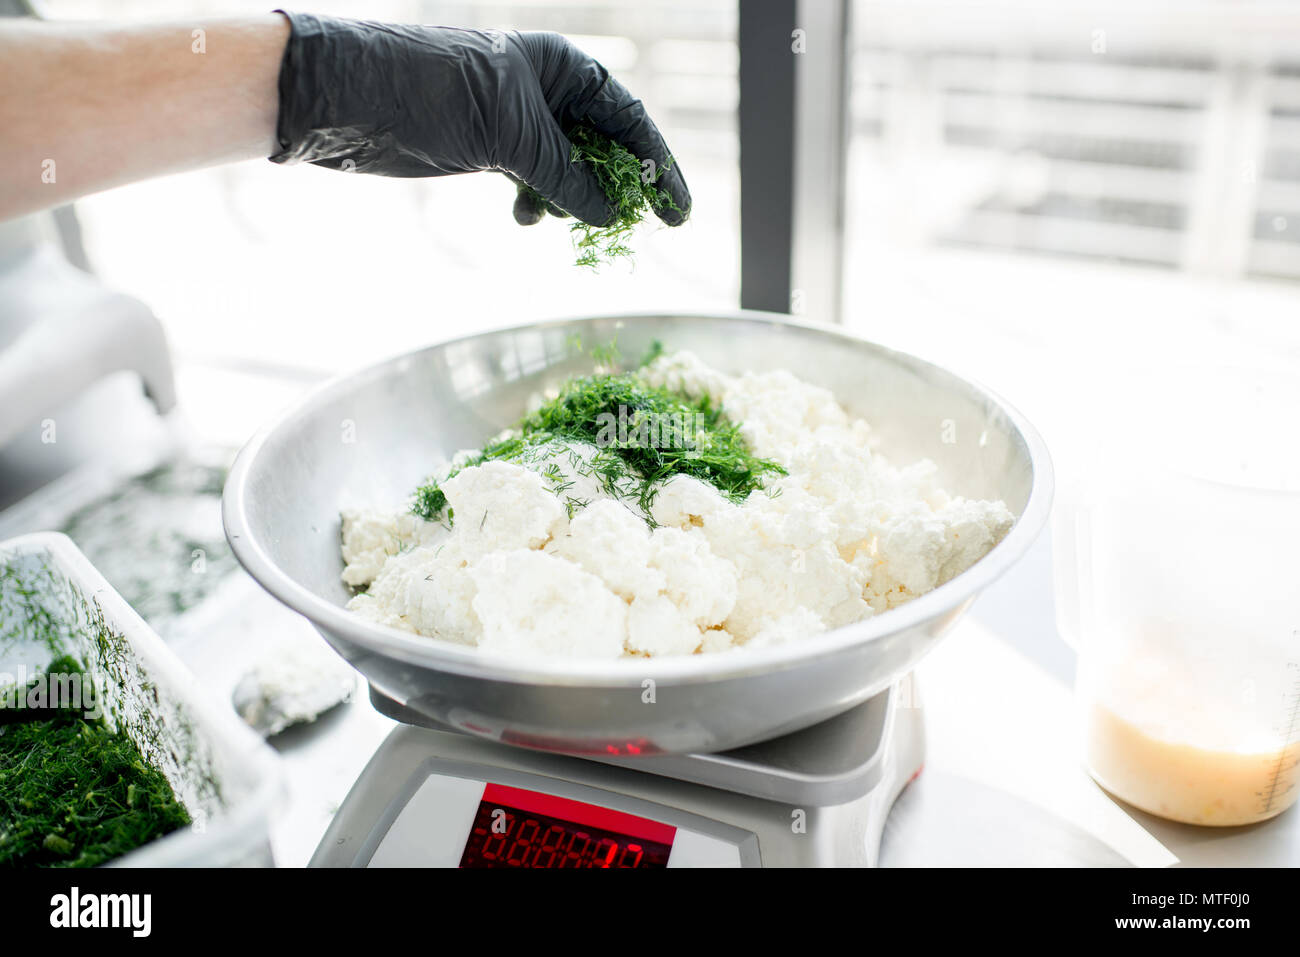 Weighing ingredients for baking with professional scales Stock Photo